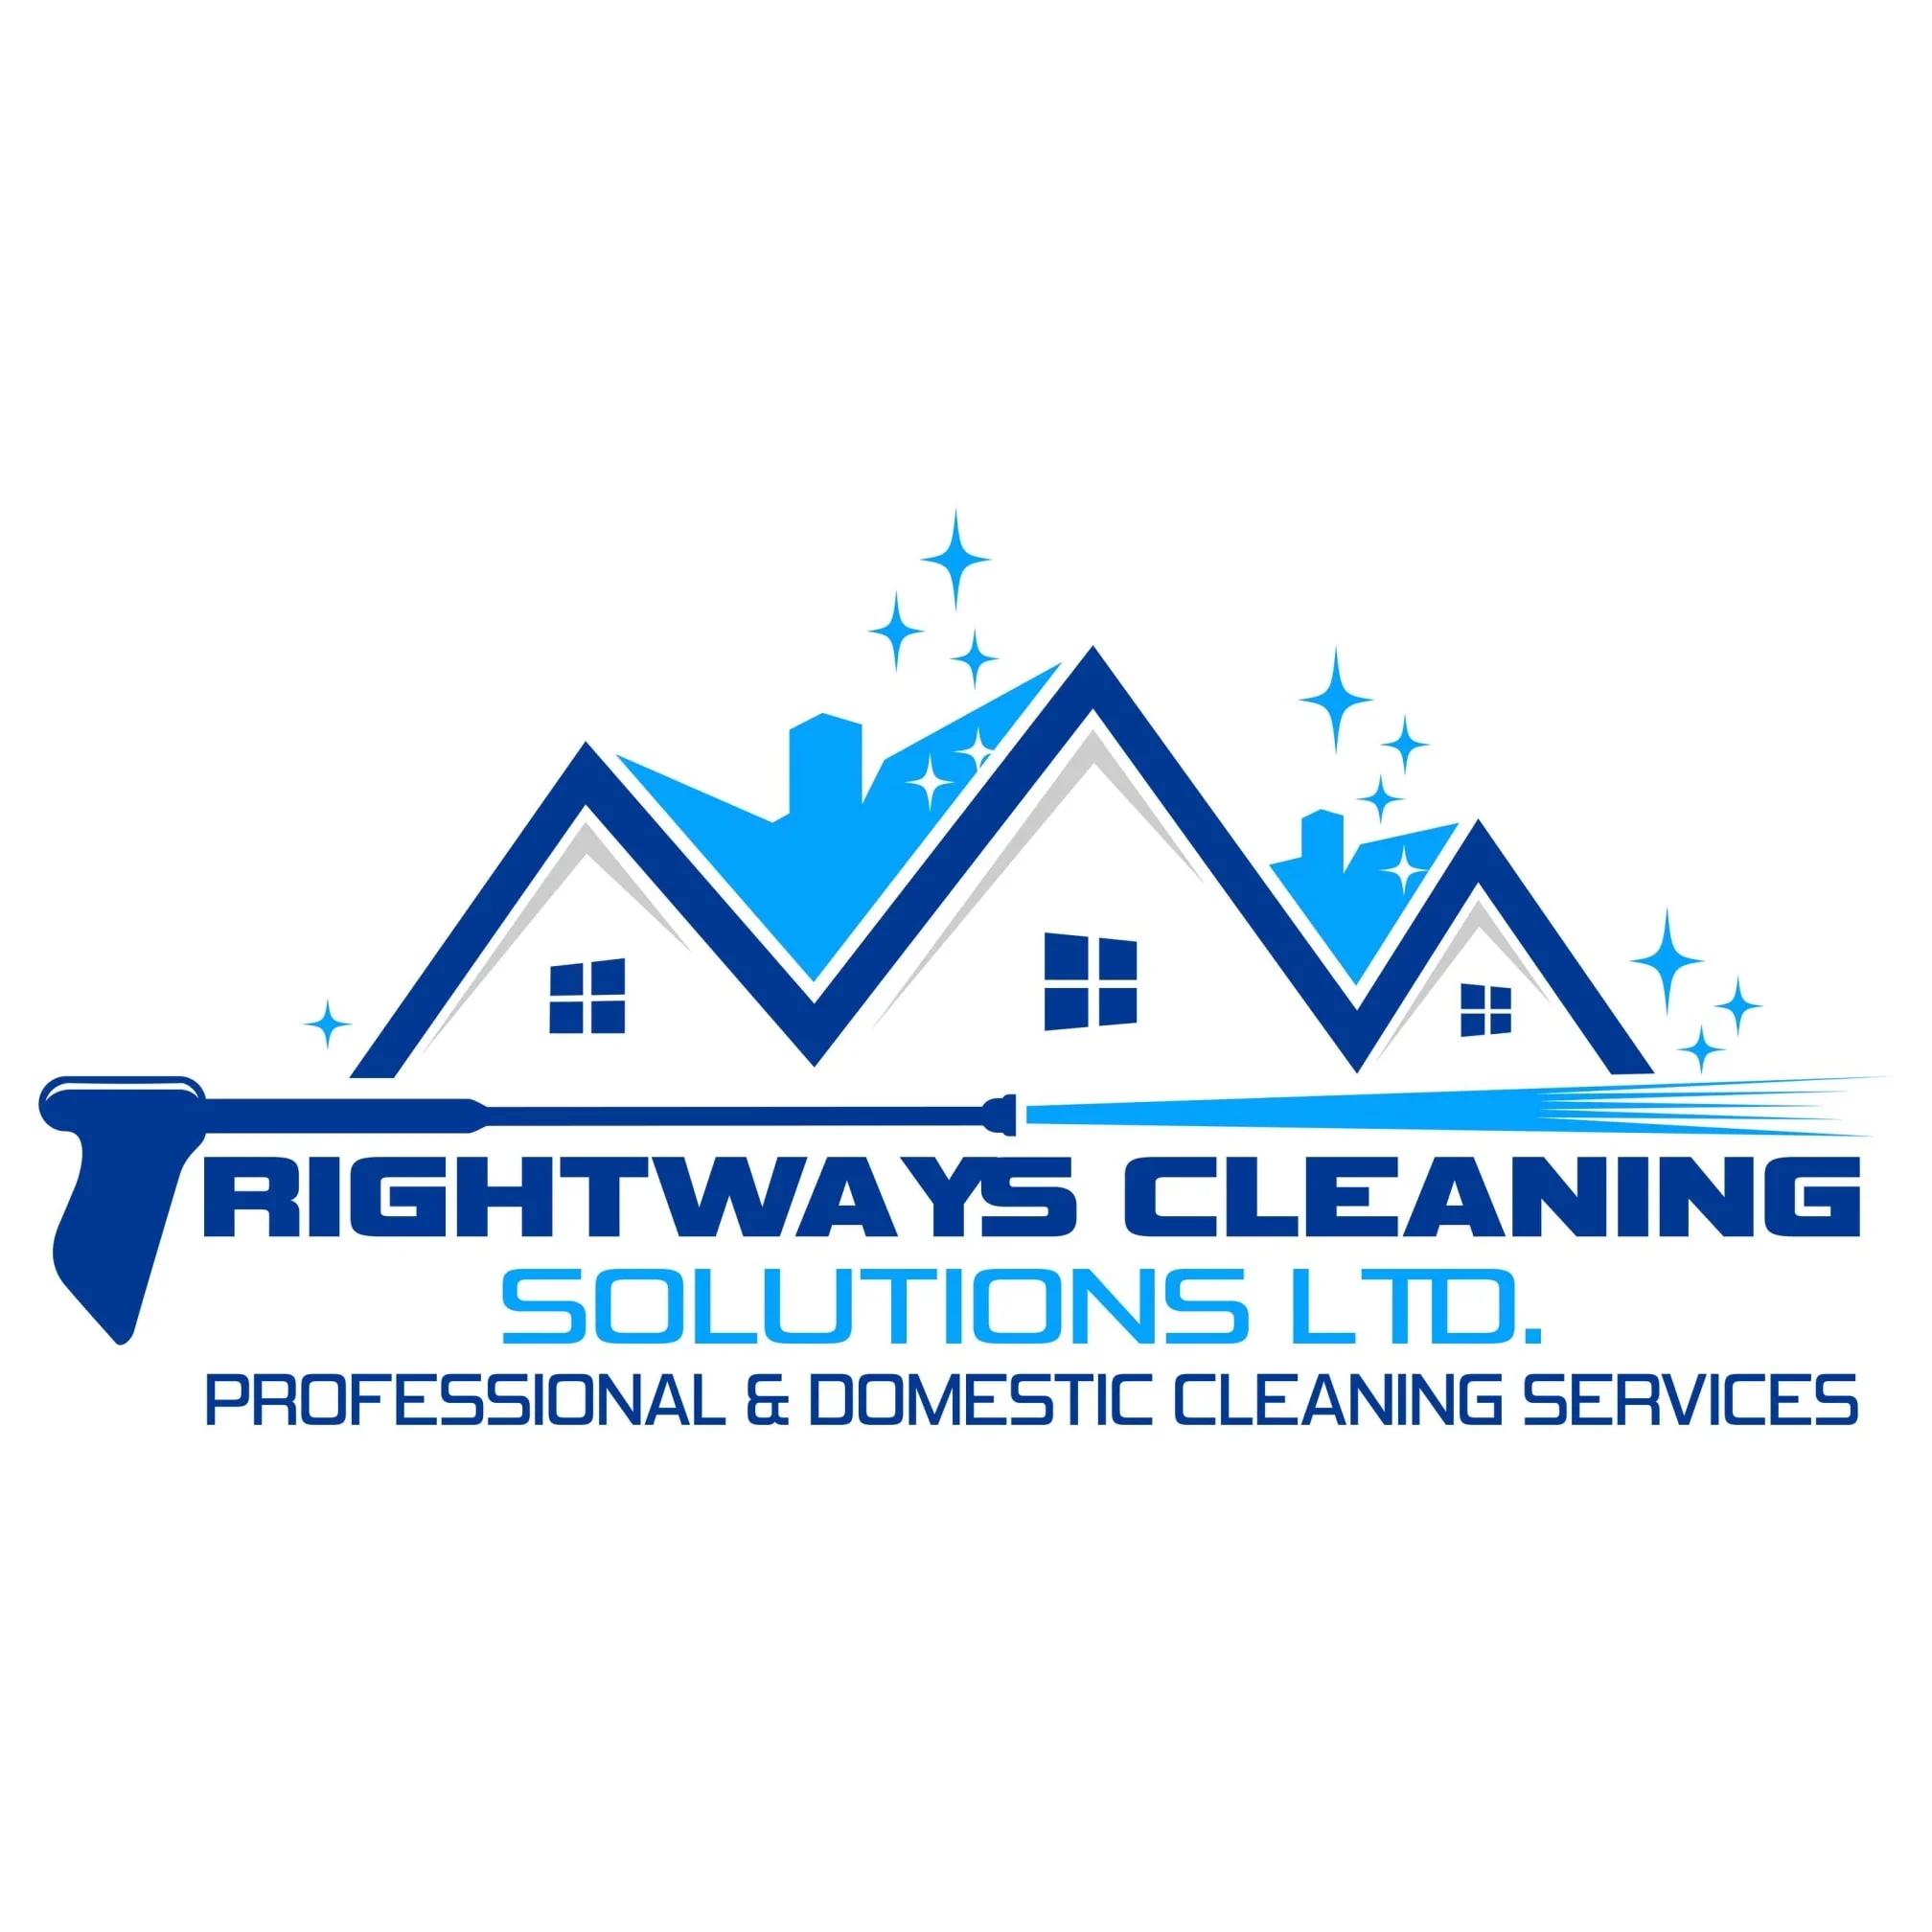 LOGO Rightways Cleaning Solutions Manchester 07354 424231